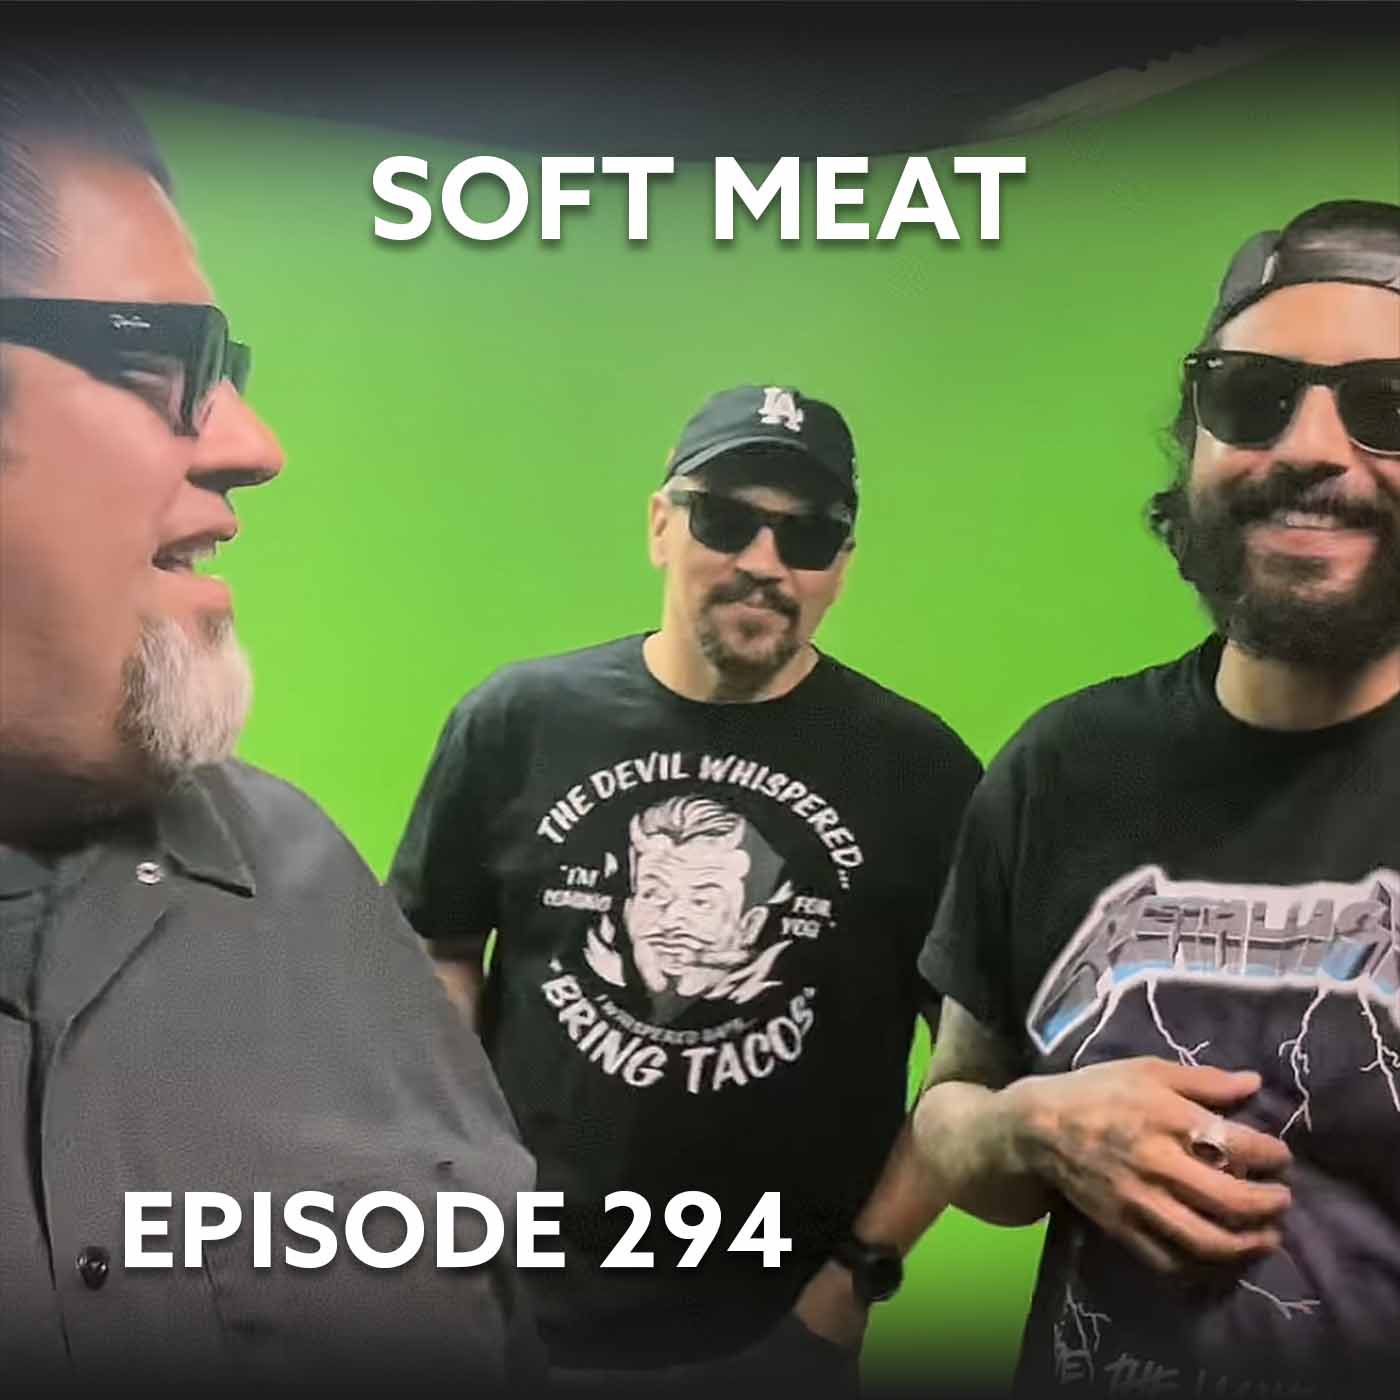 Episode 294 – Soft Meat